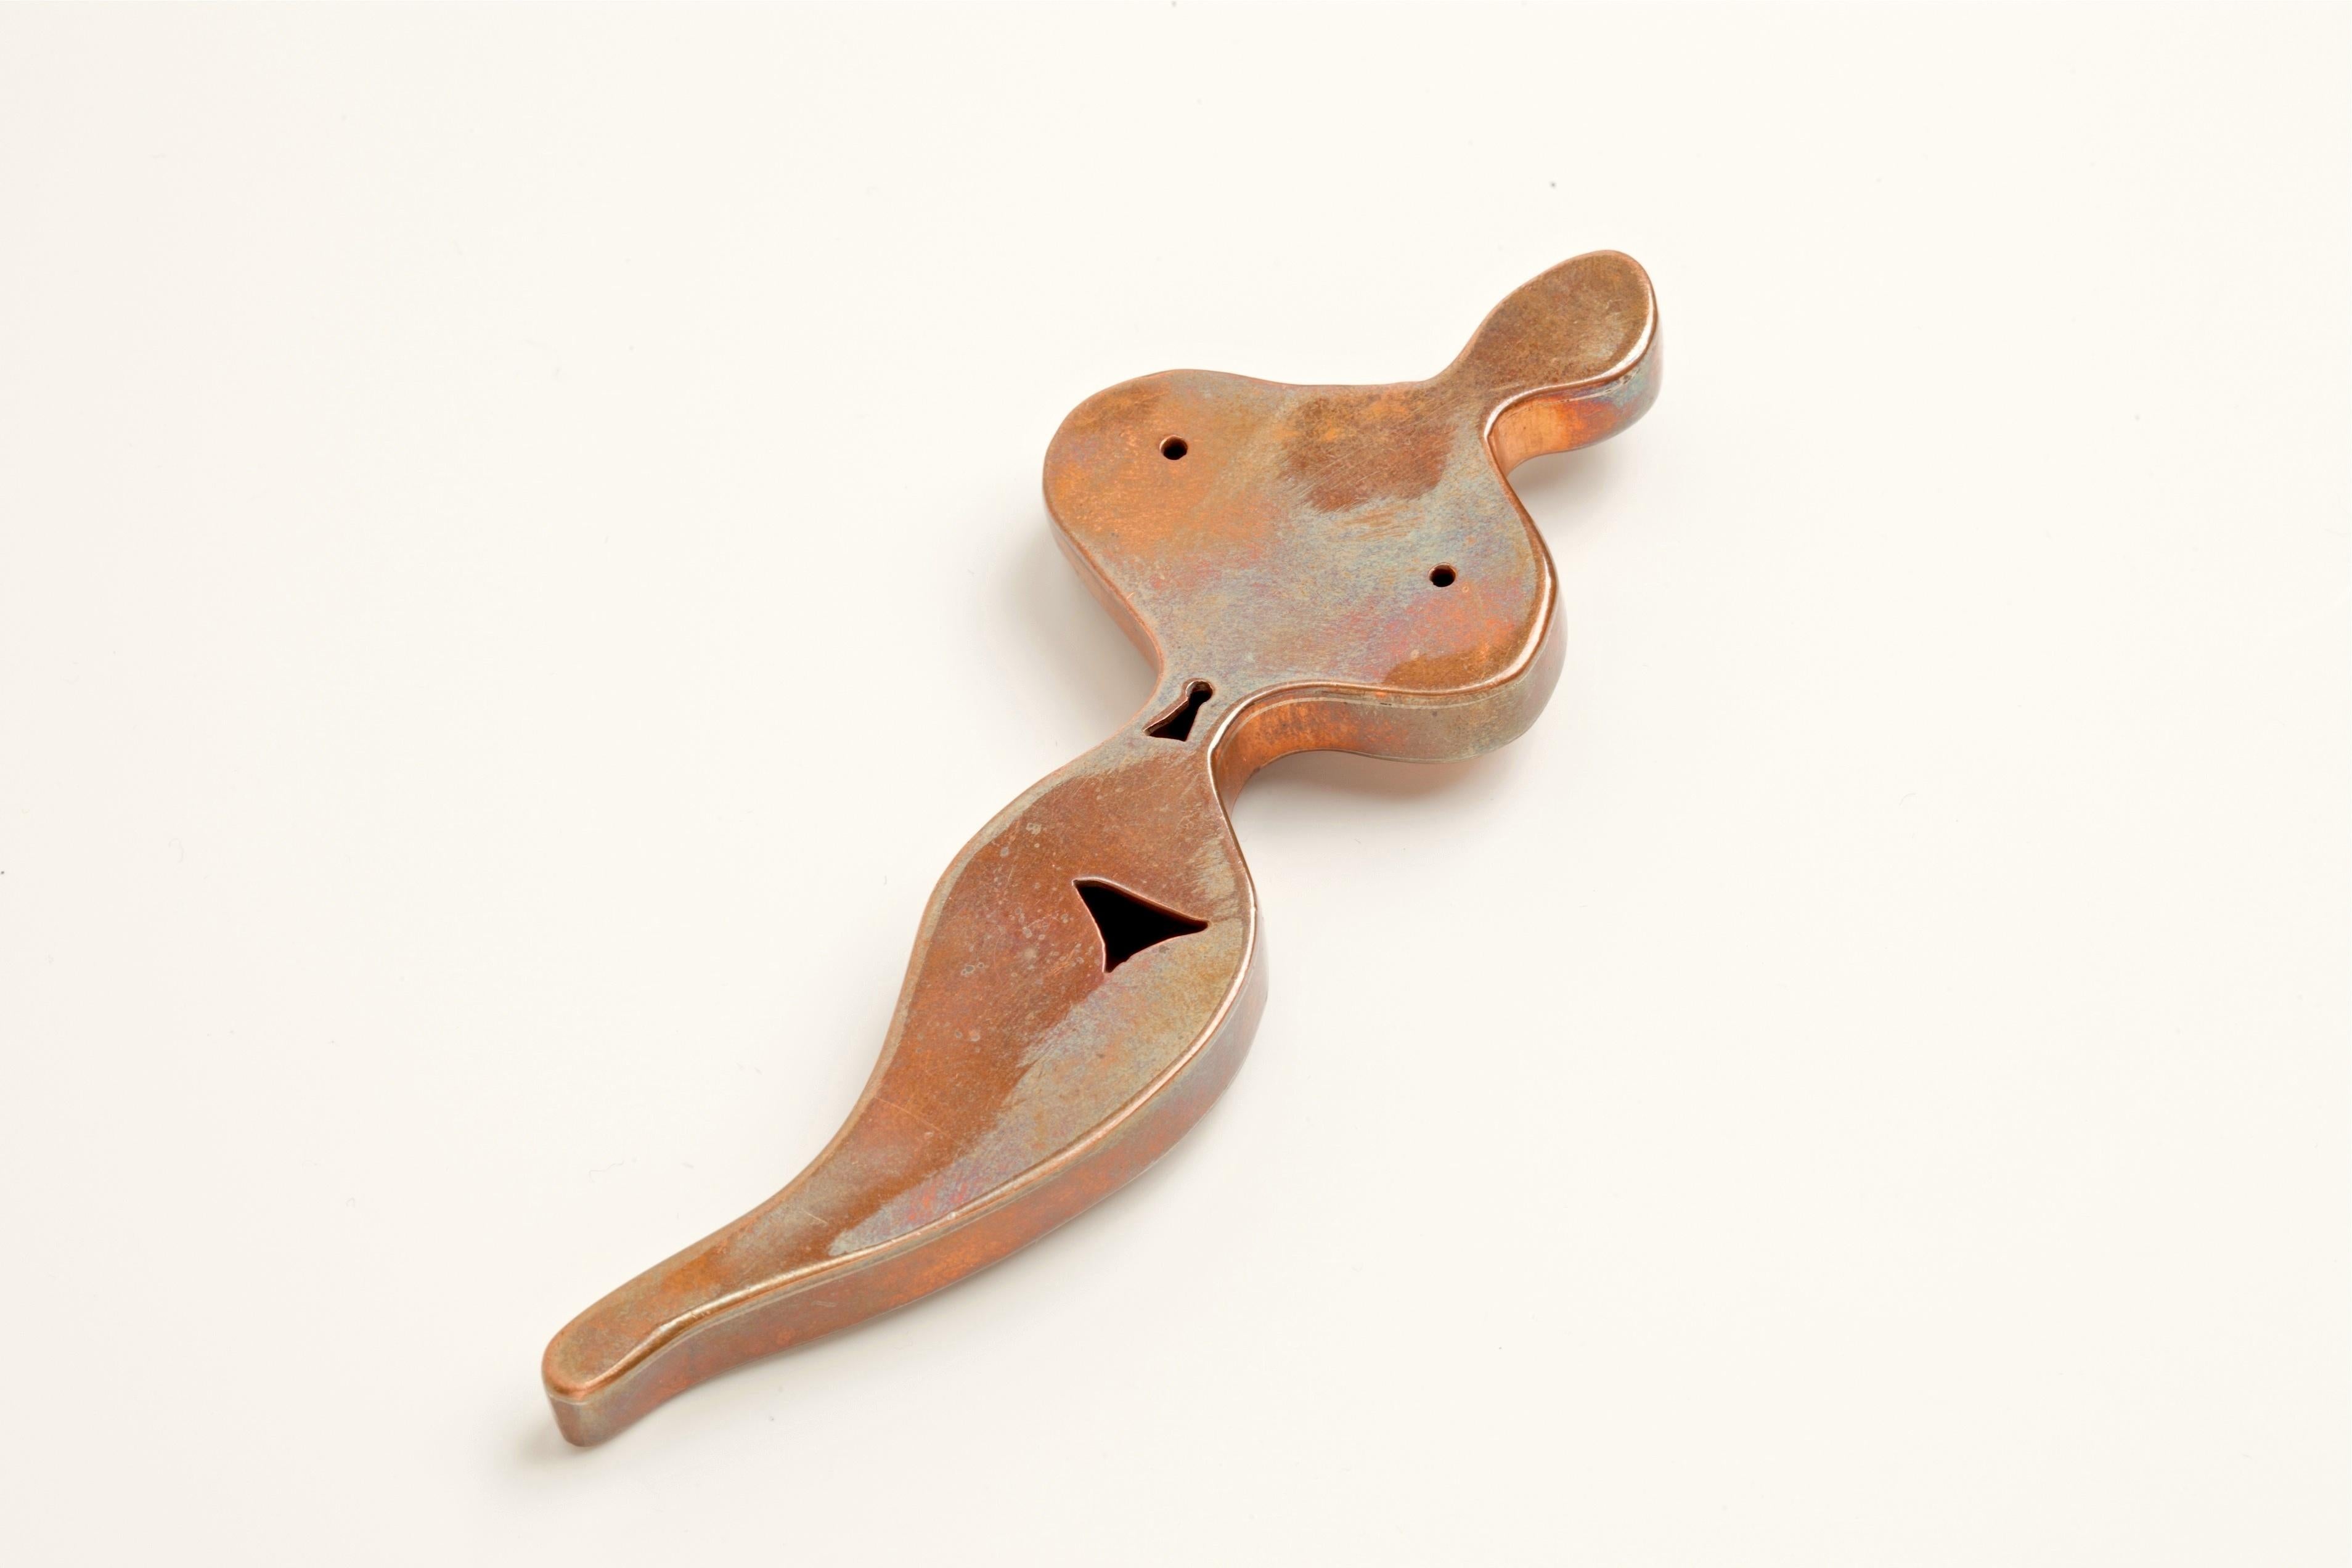 Whimsical yet a statement piece is this abstract nude figural brooch that promotes anatomically correct details on both sides of the brooch.  Super fun and a very well crafted brooch.  Beautifully designed and signed Martini or Mastrini and dated